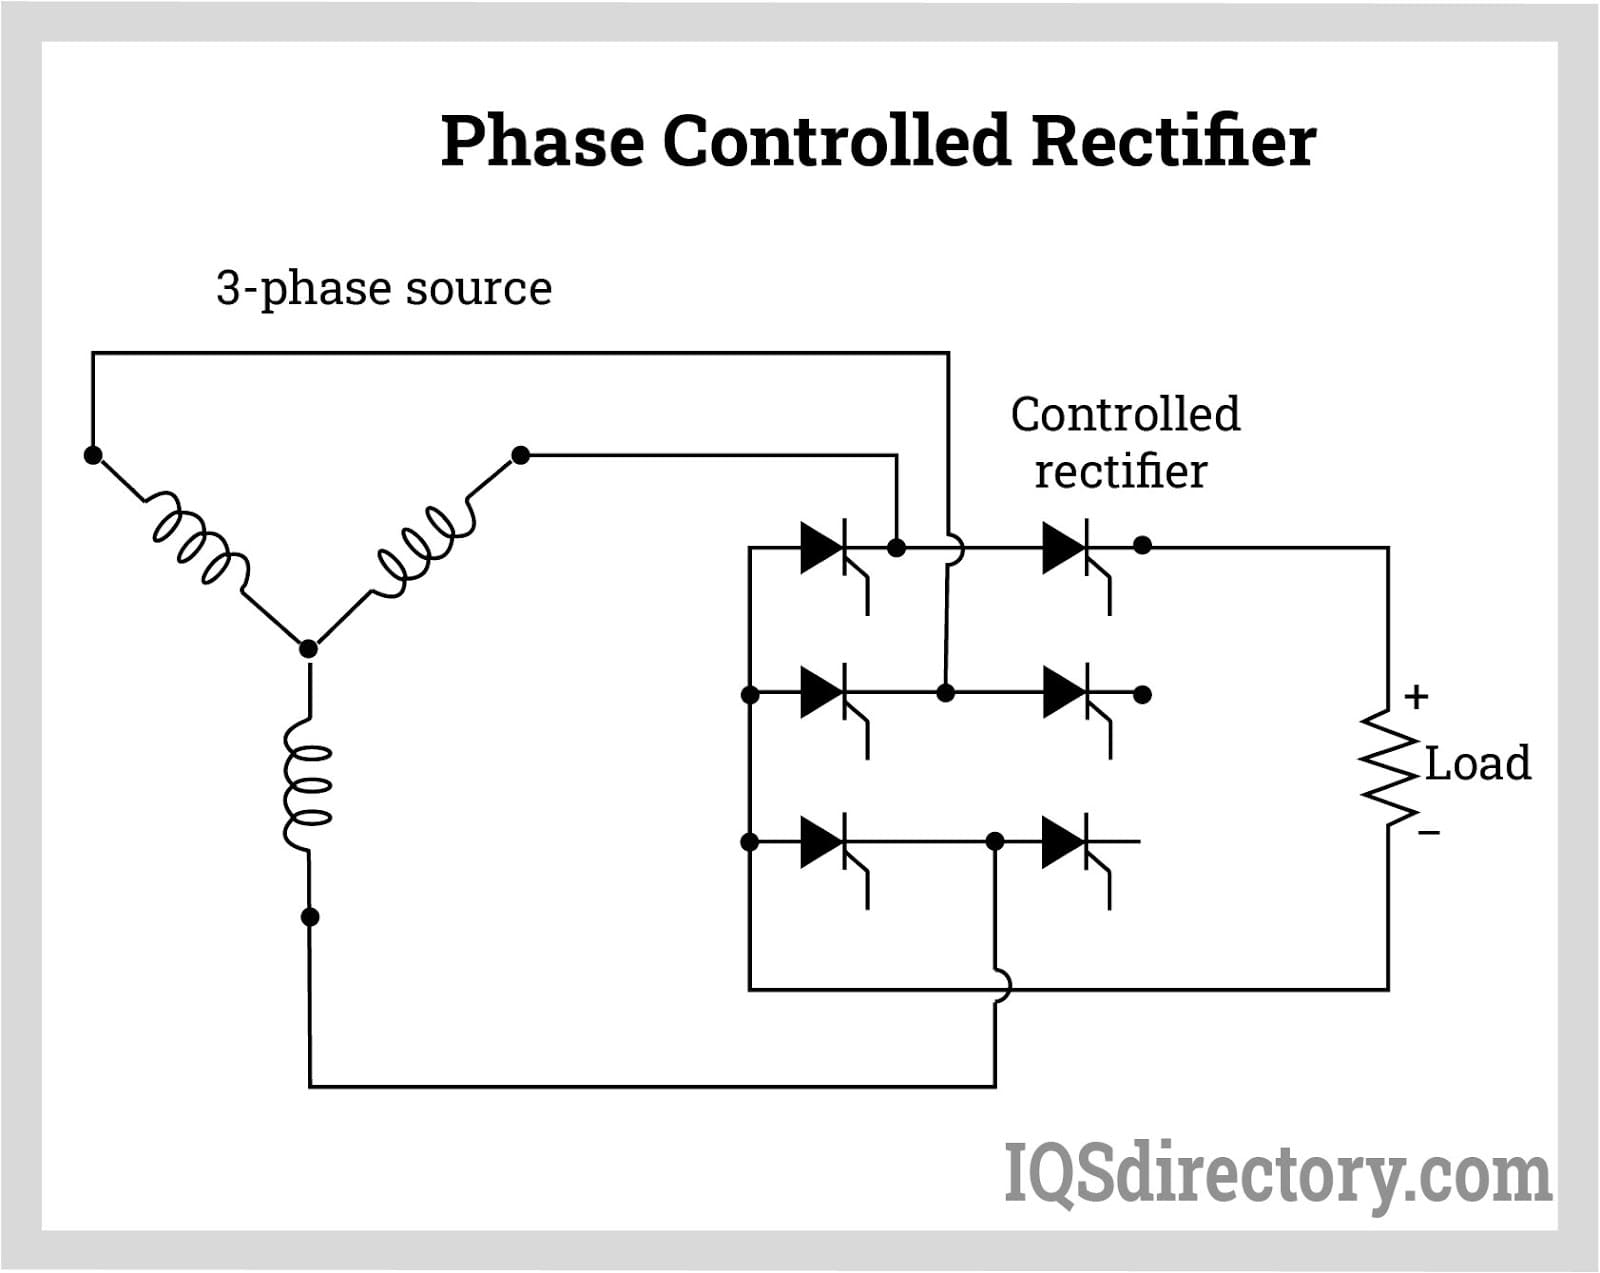 Phase Controlled Rectifier